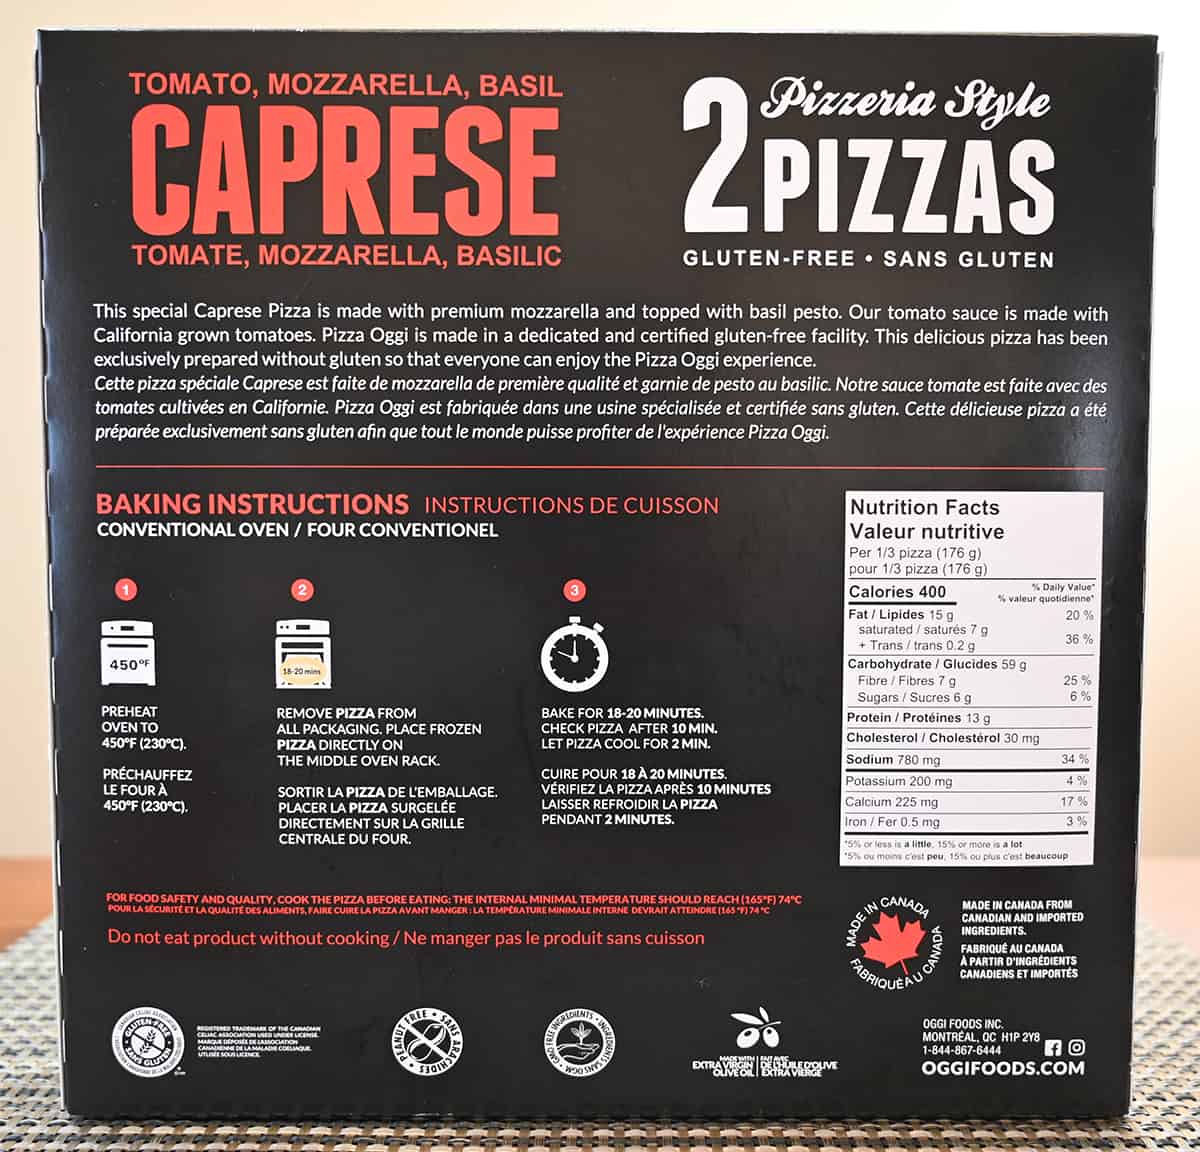 Image of the back of the pizza box showing cooking instructions, nutrition facts and where it was made. 